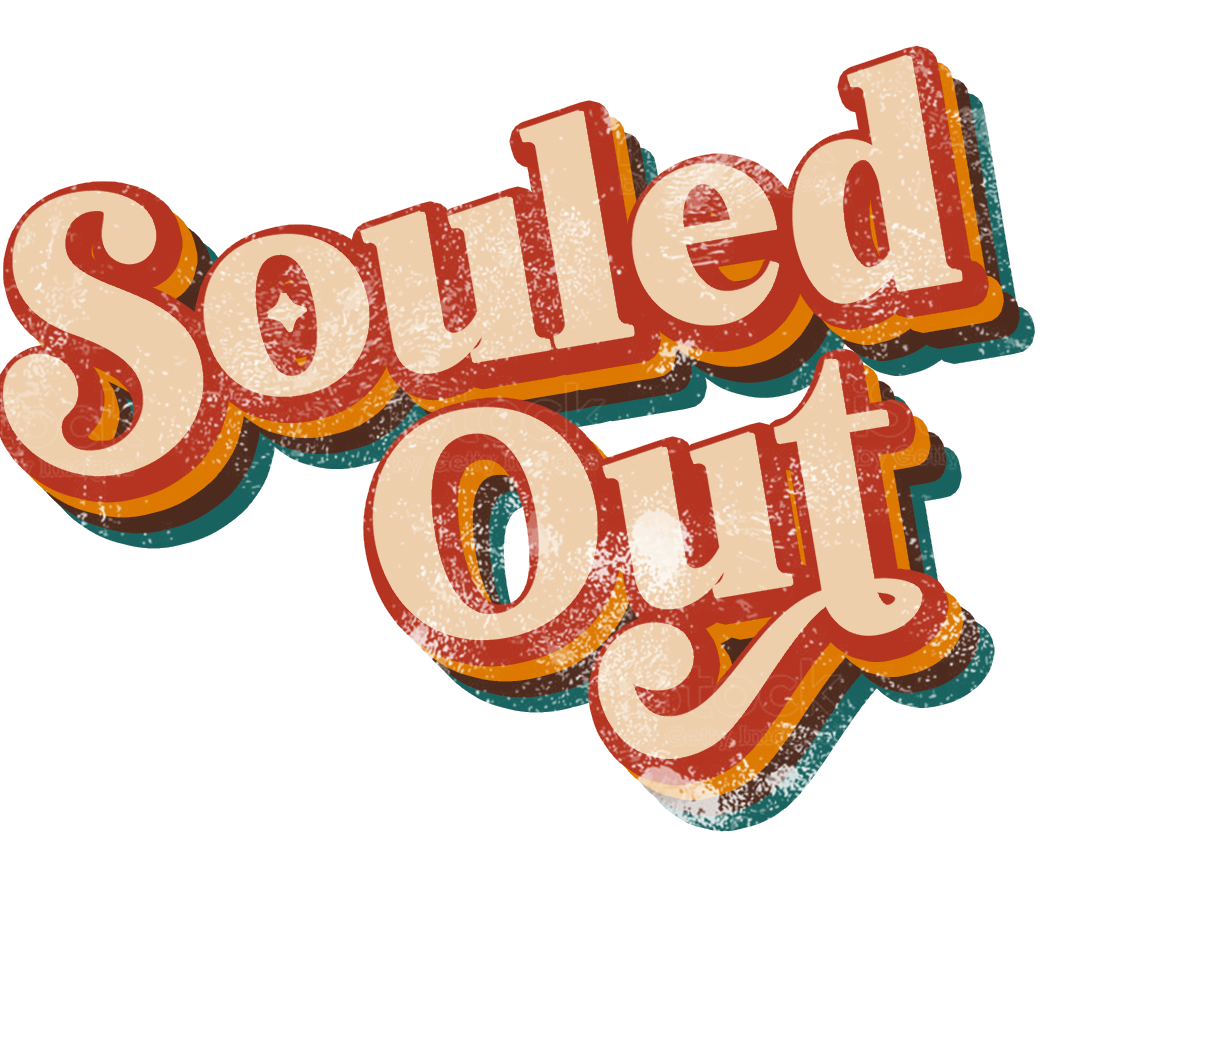 Souled out